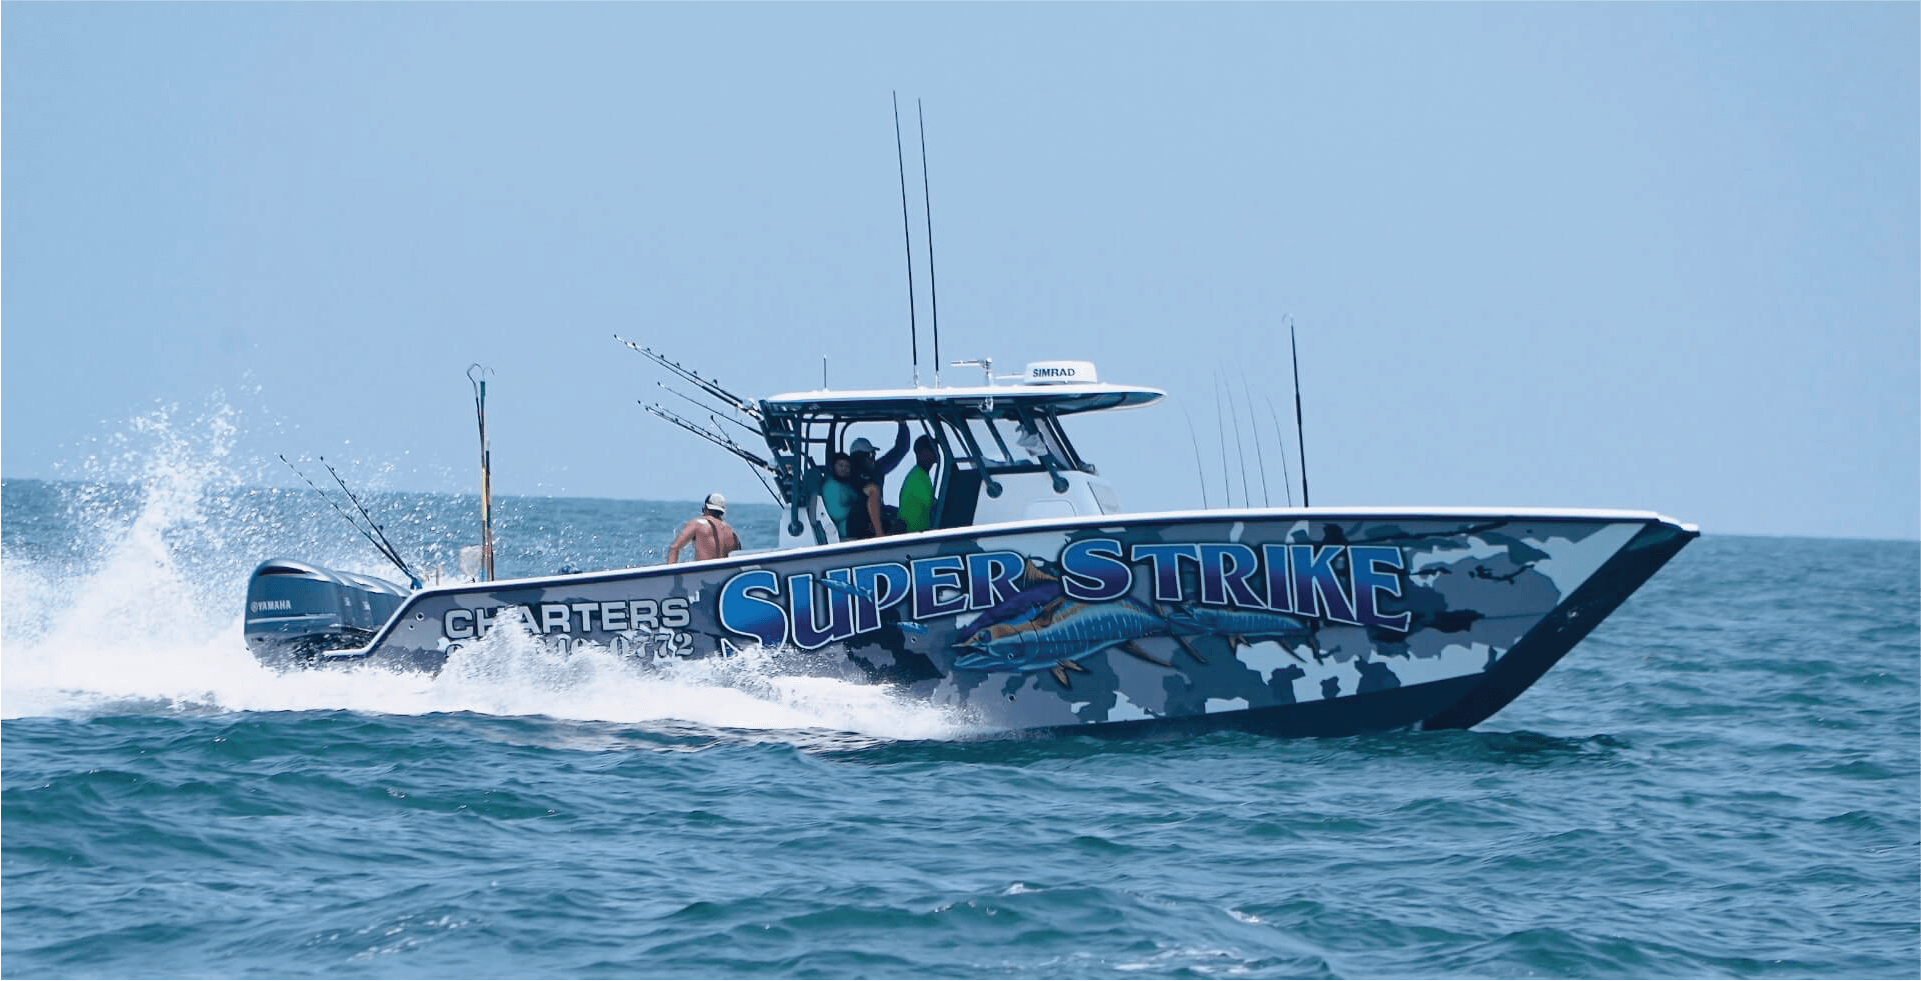 Contact Superstrike Charters for fishing charters